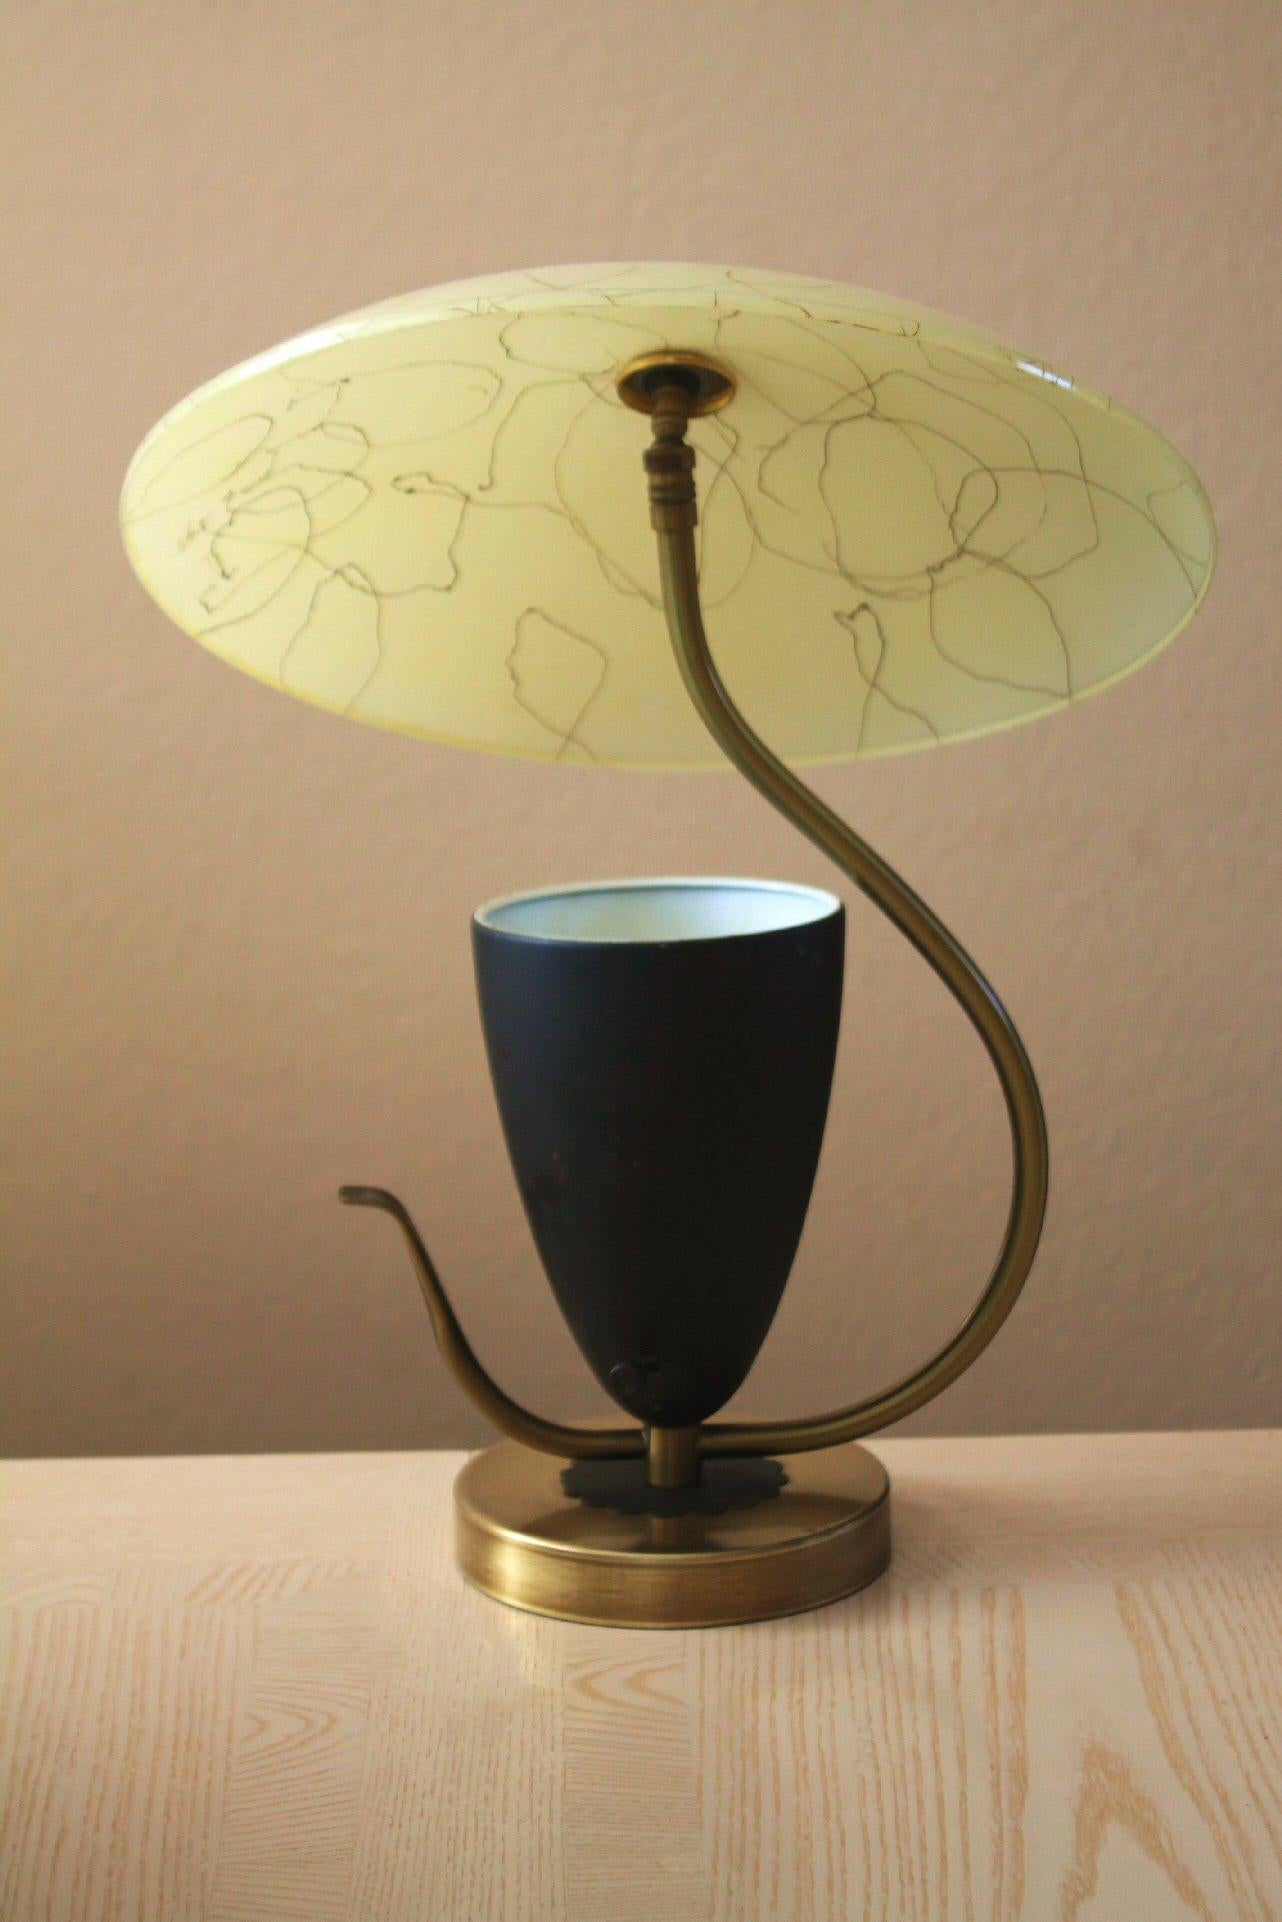 Rare MOSS Articulating Fiberglass Reflector Table Lamp Mid Century Modern 1950s  In Good Condition For Sale In Peoria, AZ